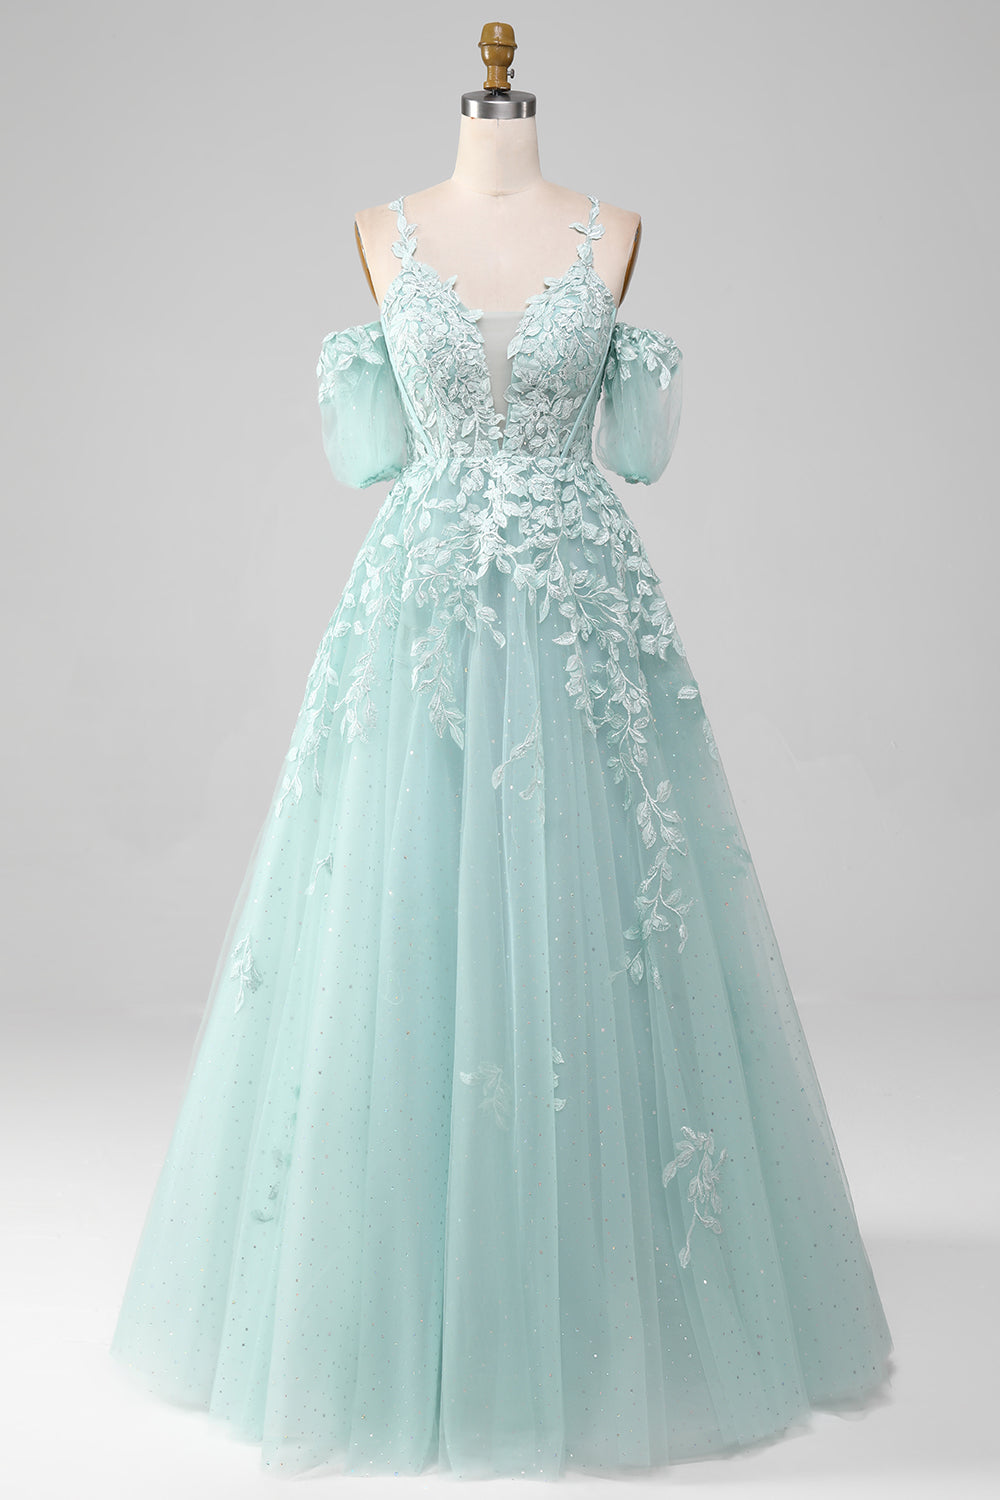 Mint A Line Tulle Off the Shoulder Lace Up Long Corset Prom Dress With Appliques Gowns, Homecoming Dress Shopping Near Me